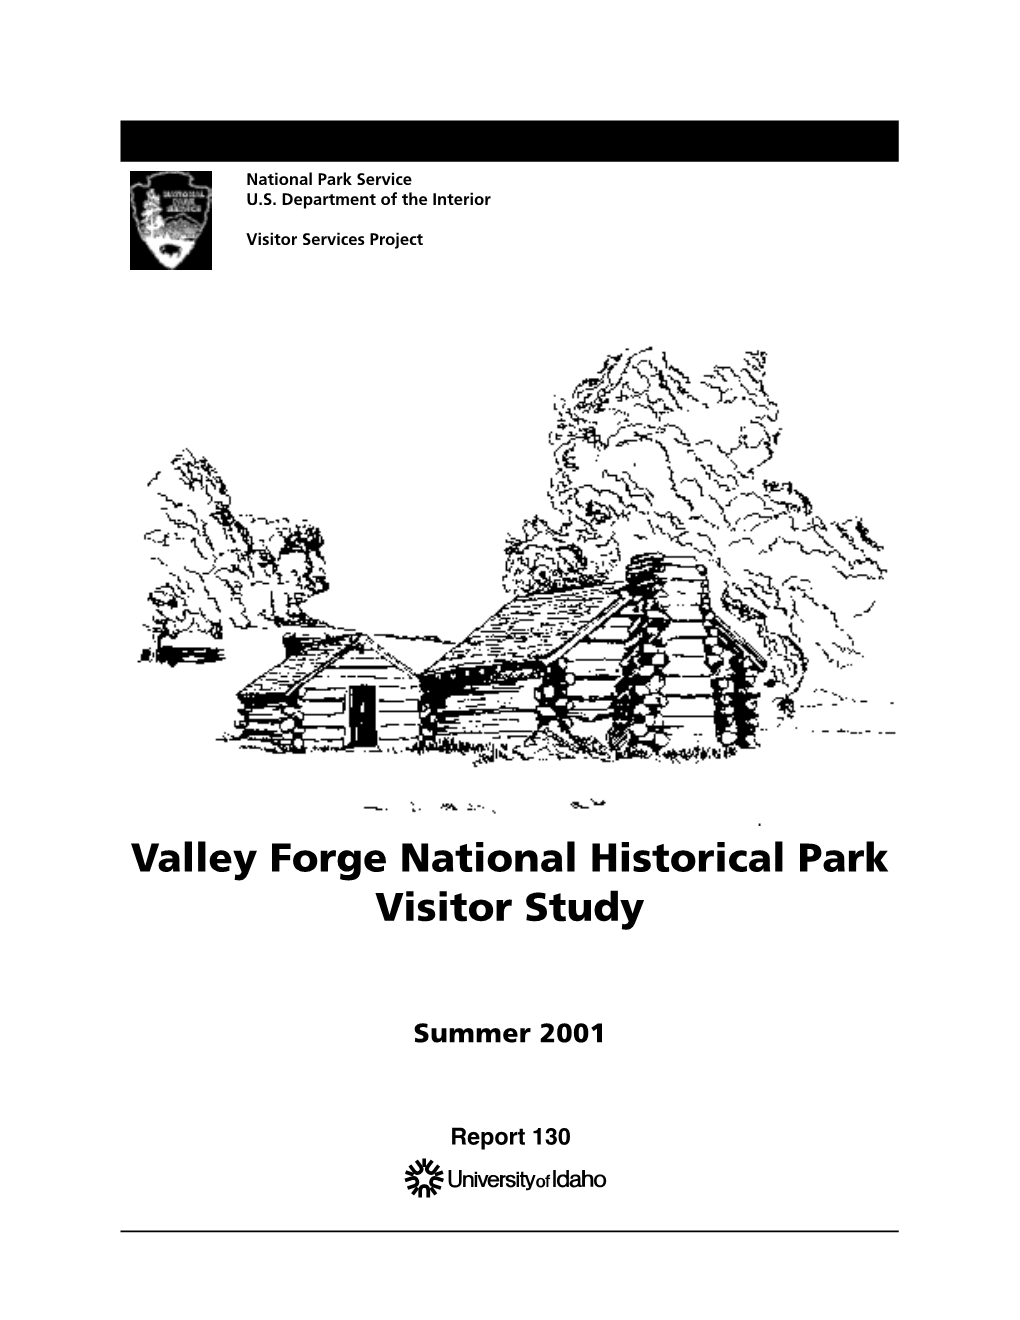 Valley Forge National Historical Park Visitor Study